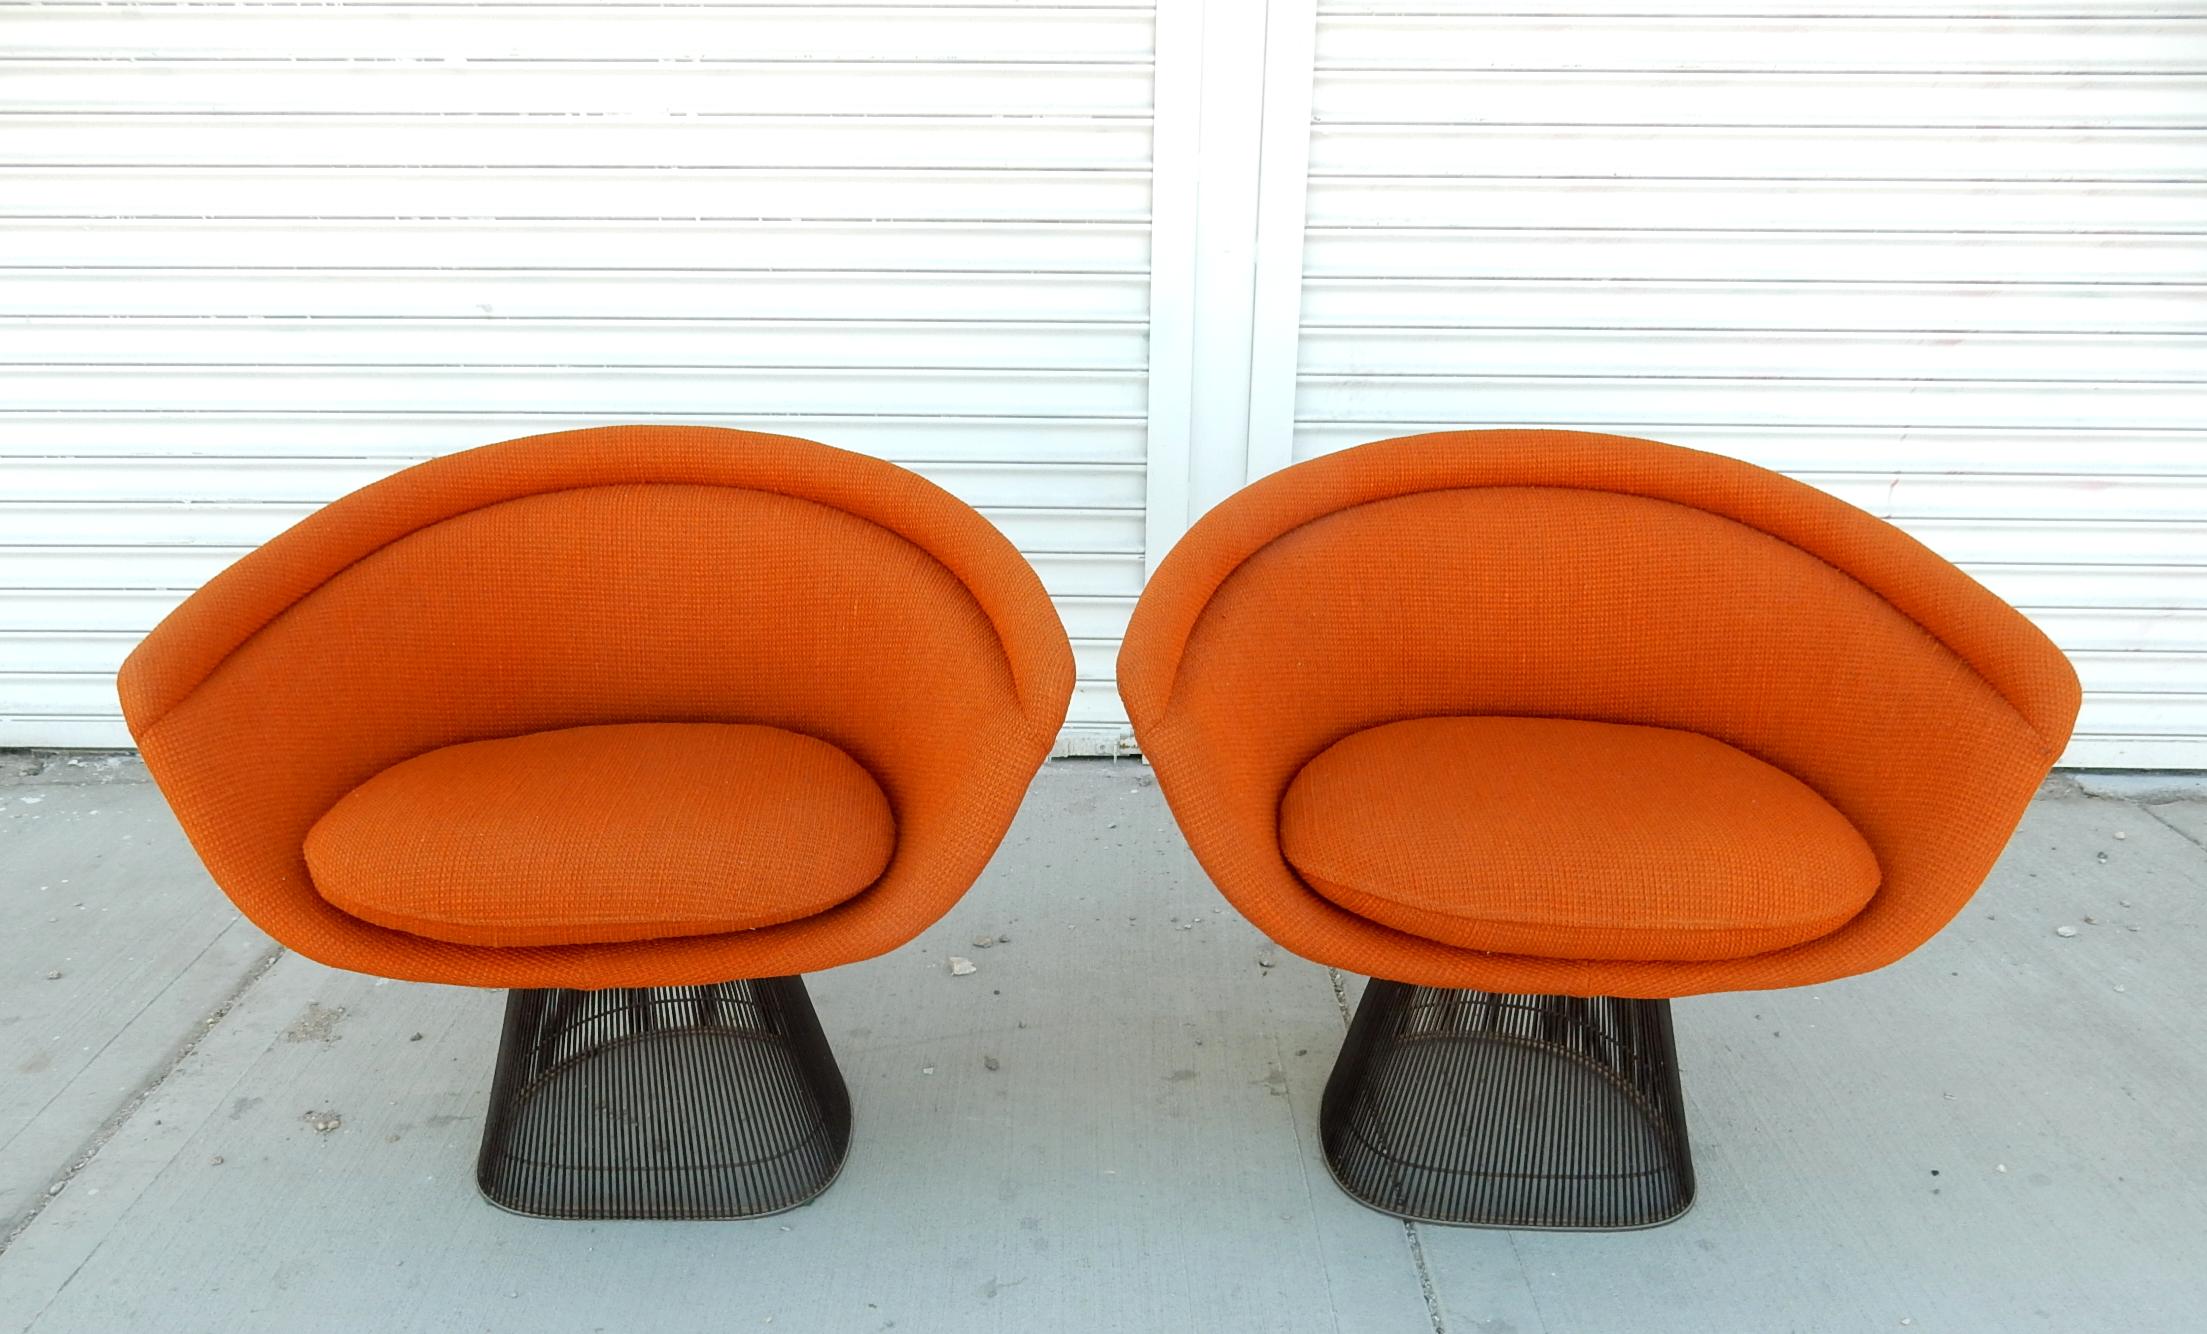 American Vintage 1970's Warren Platner for Knoll Wire Lounge Chairs Original Knoll Fabric